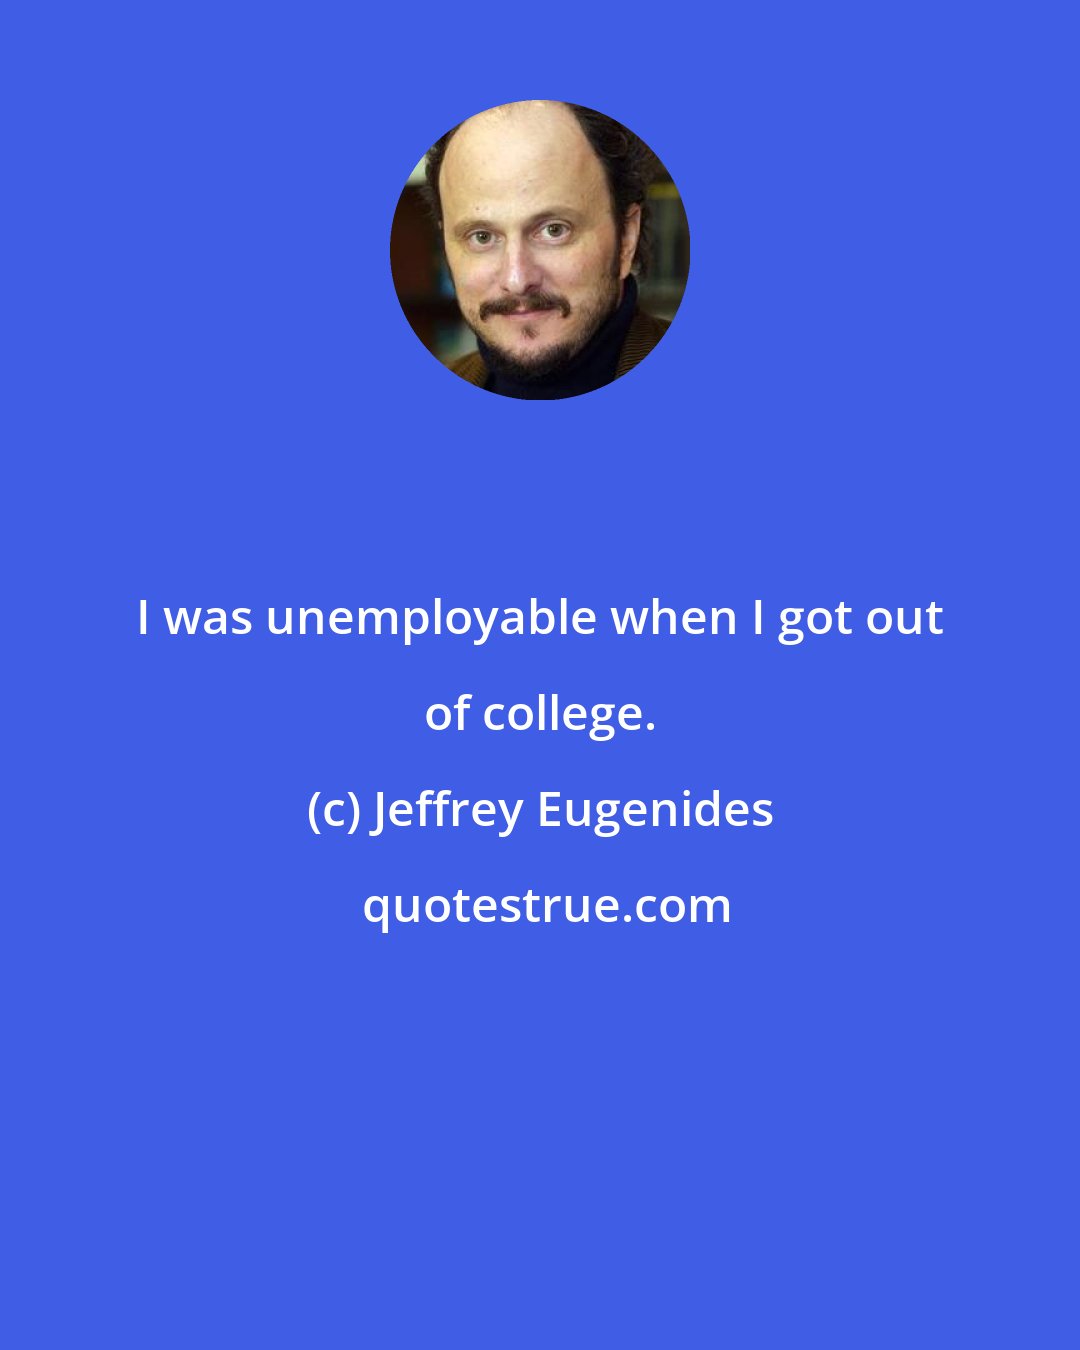 Jeffrey Eugenides: I was unemployable when I got out of college.